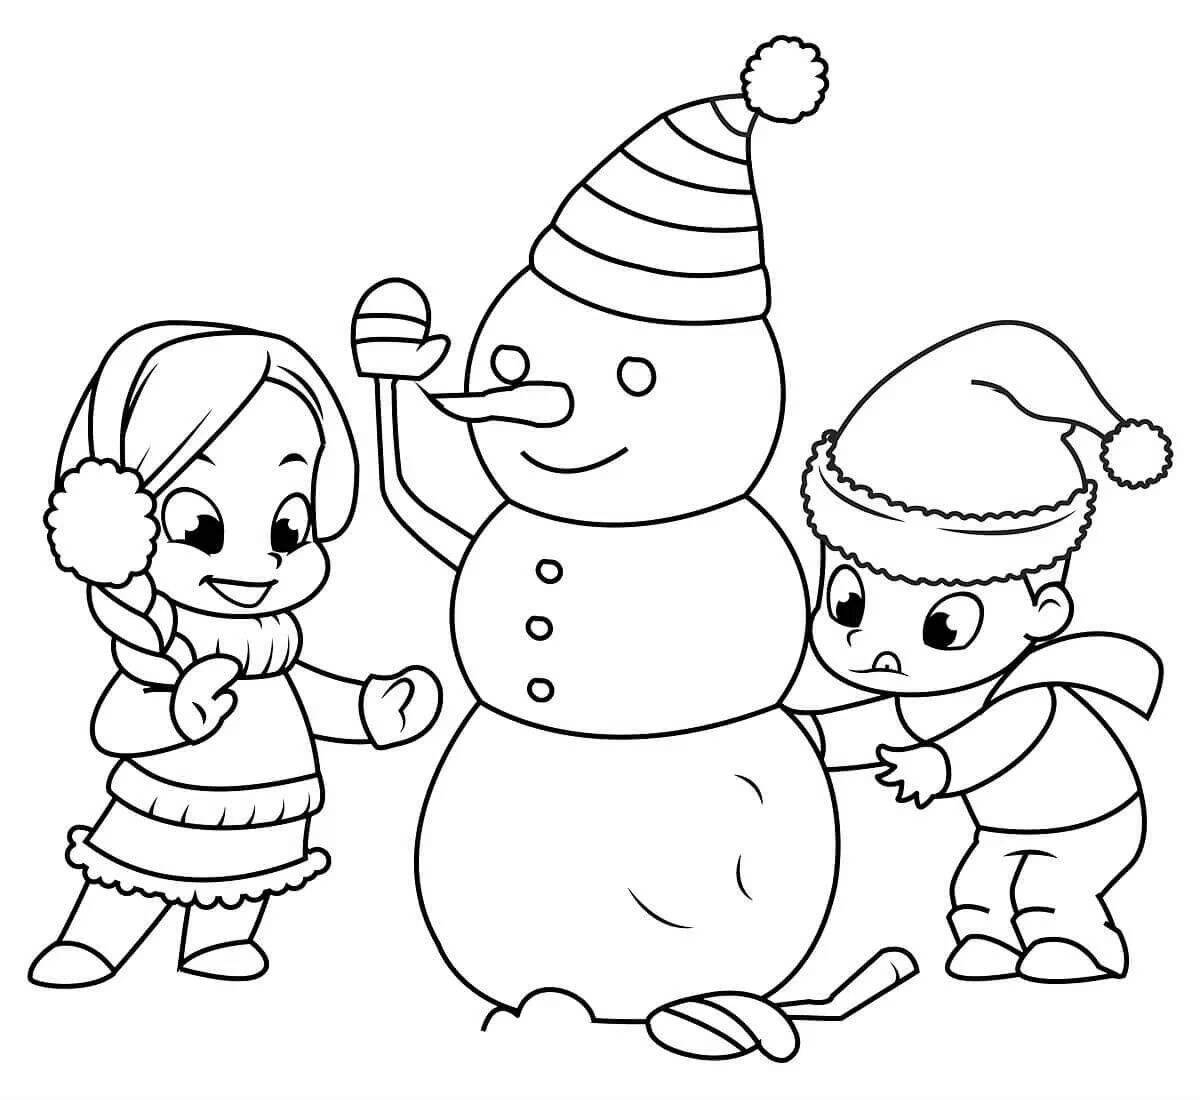 Glitter snowman coloring book for kids 3 4